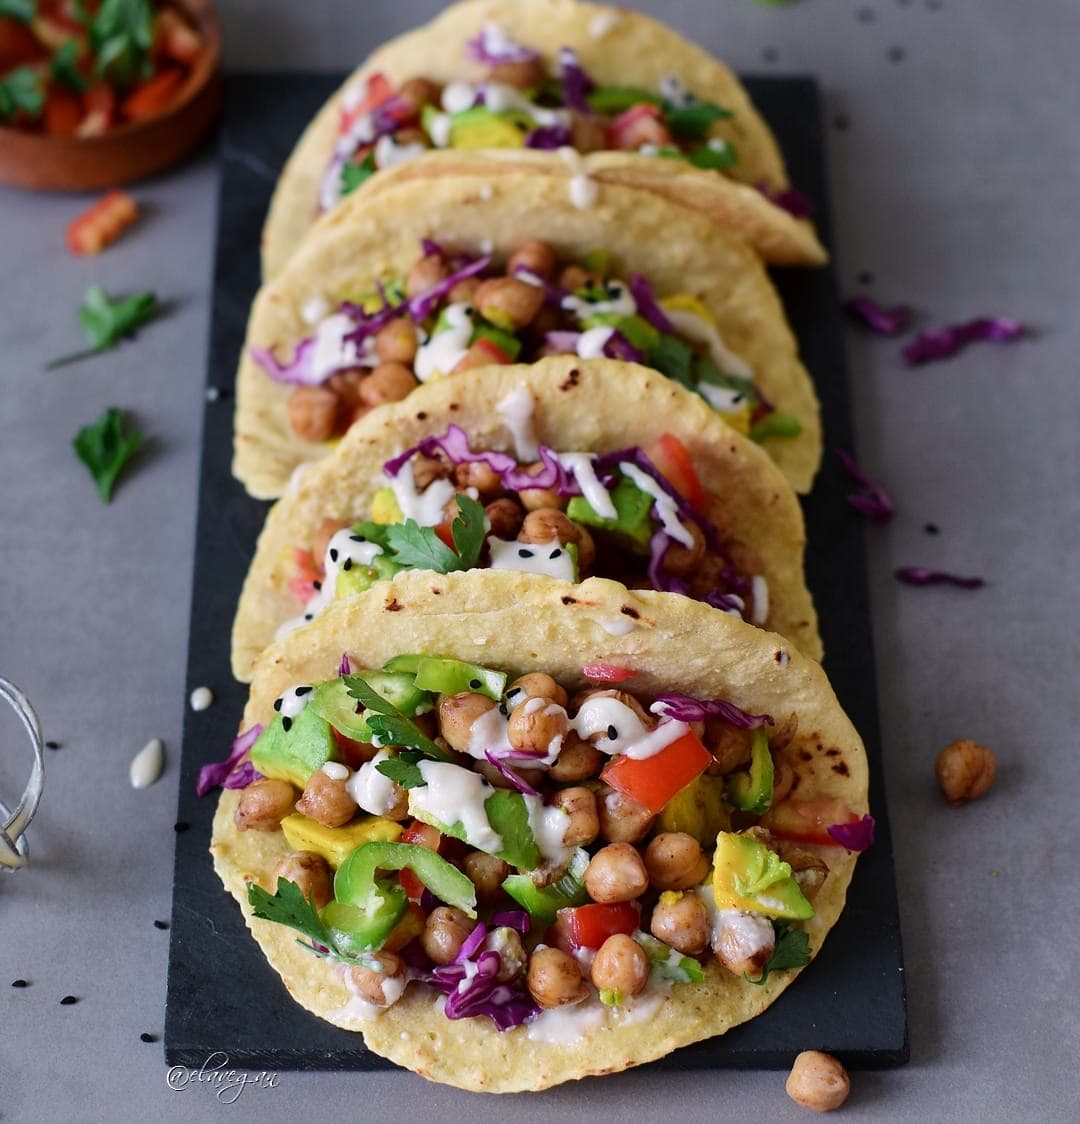 Chickpea tacos with avocado, veggies, and a tahini dressing